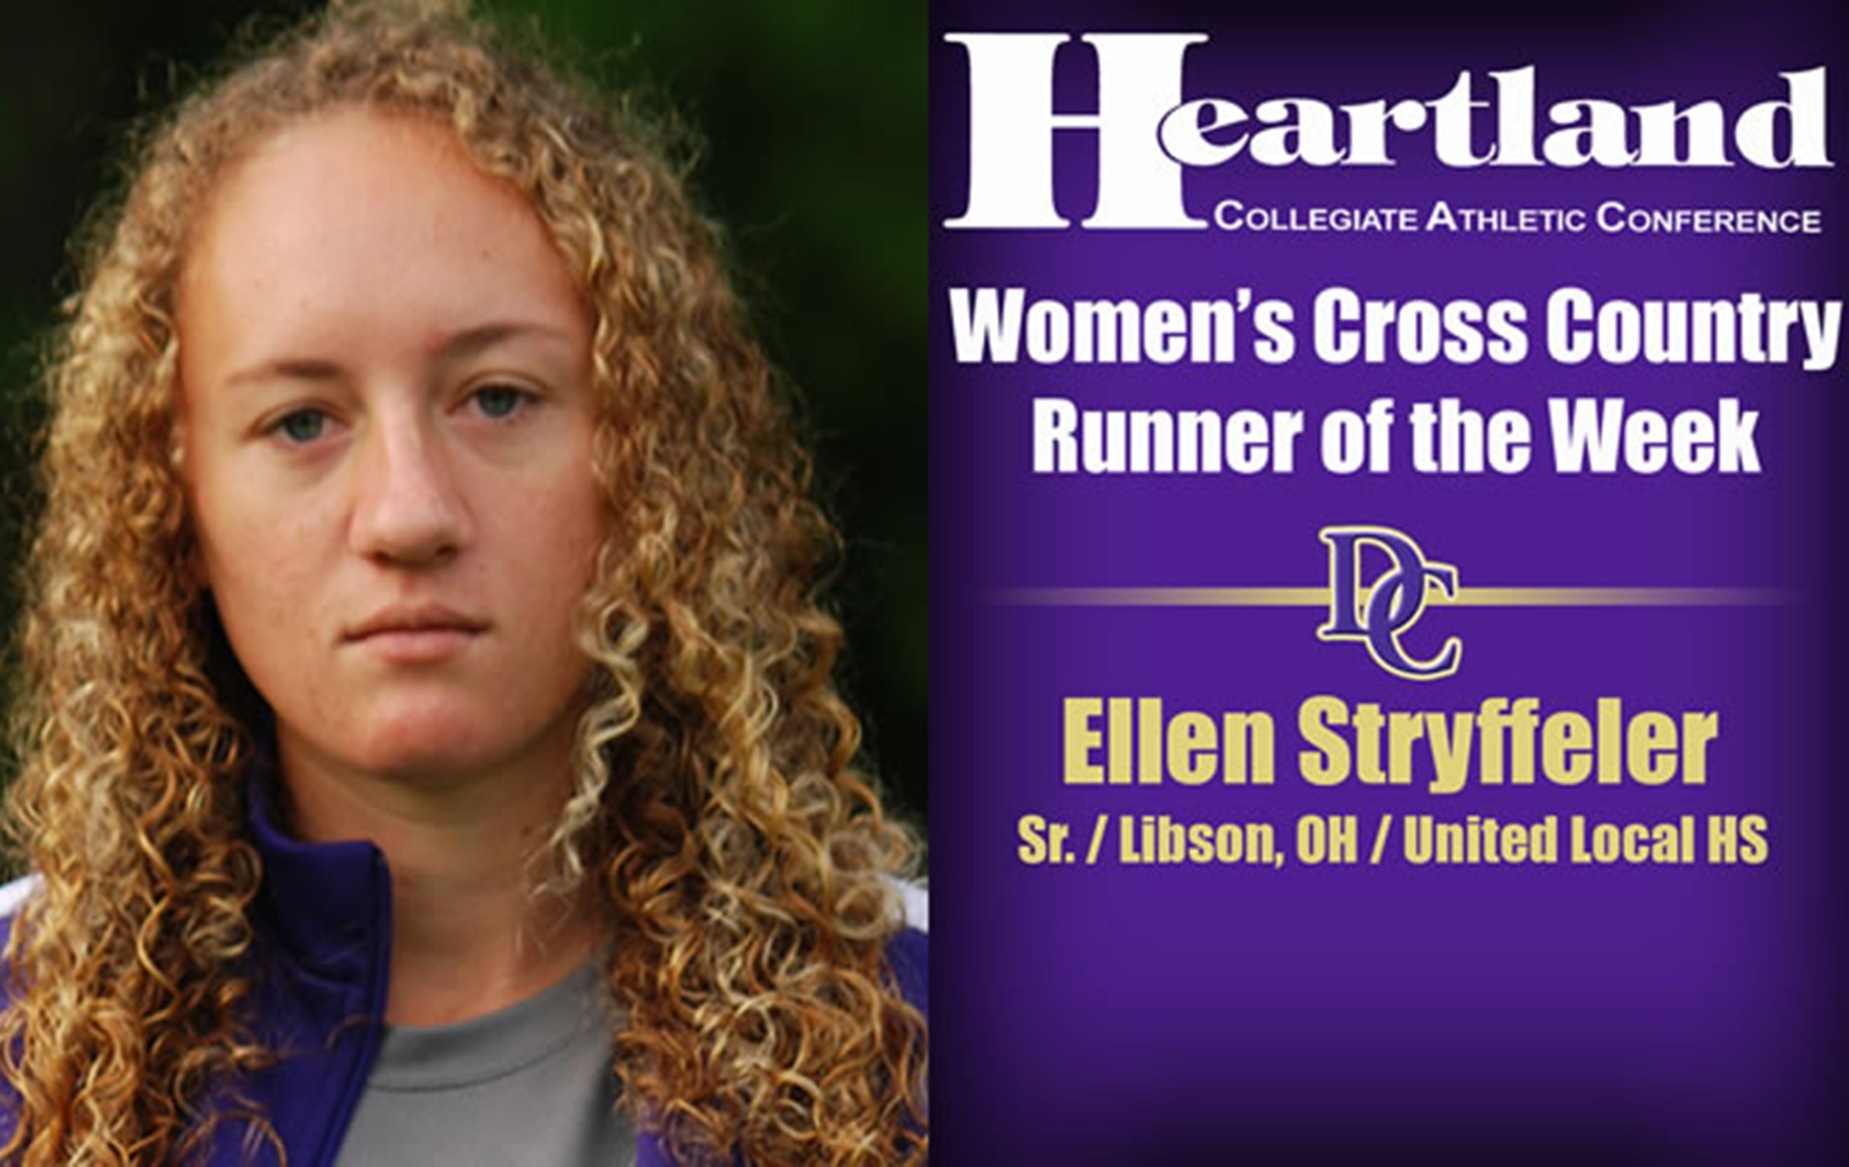 Stryffeler Collects Second HCAC Runner-of-the-Week Award